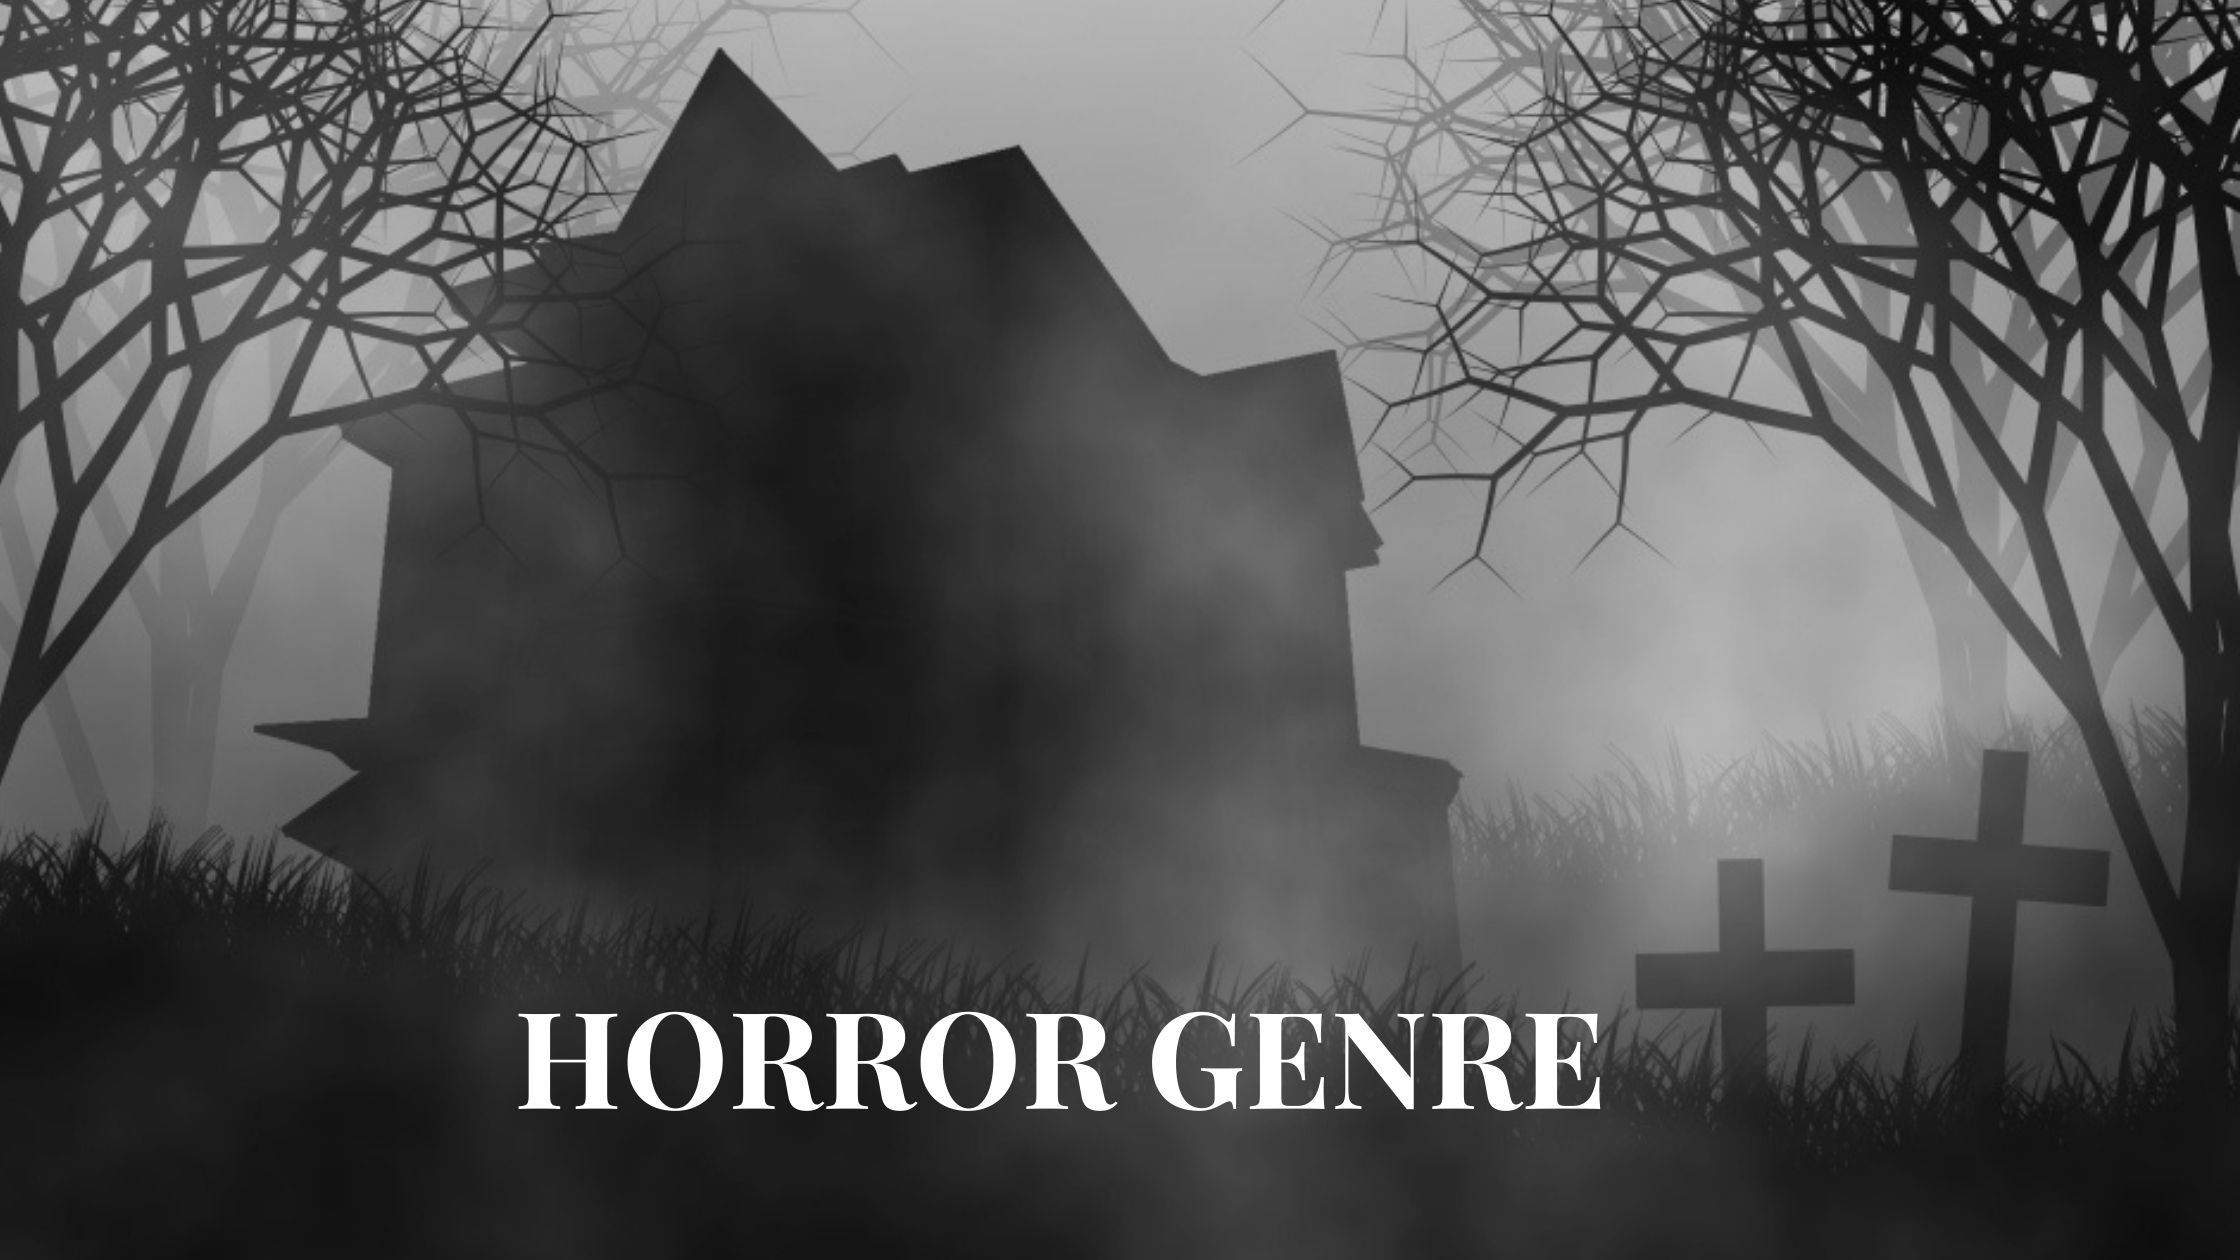 A Broad Overview of the Horror Genre and Its Key Characteristics